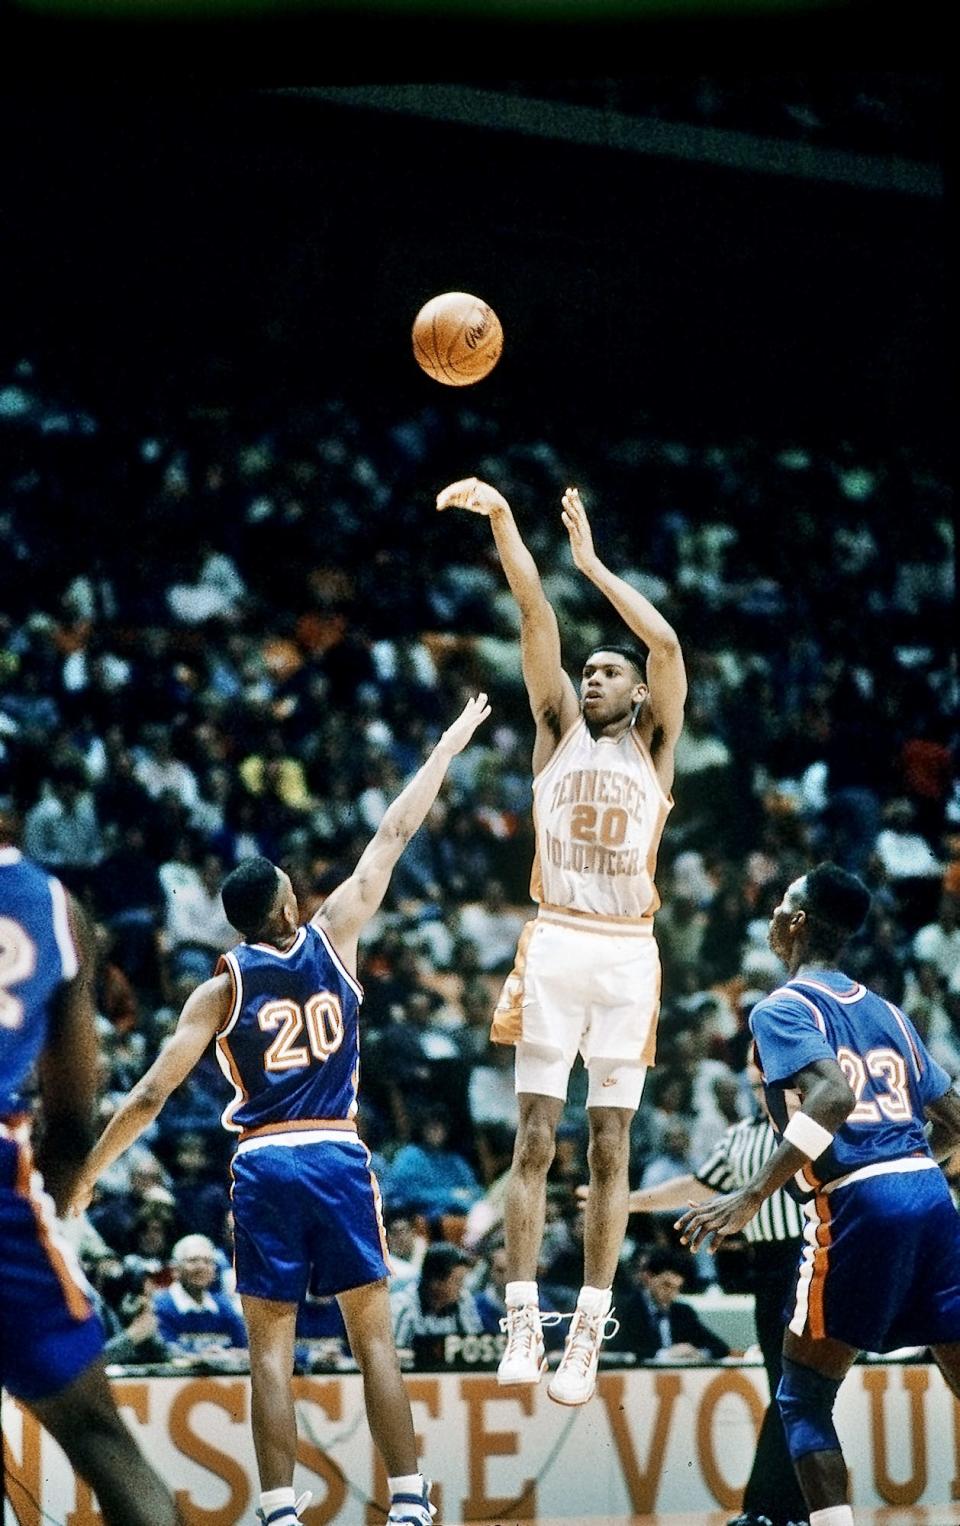 Allan Houston is the leading scorer in UT men’s basketball history with 2,801 points from 1989-93. Pete Maravich is the only SEC player who scored more.